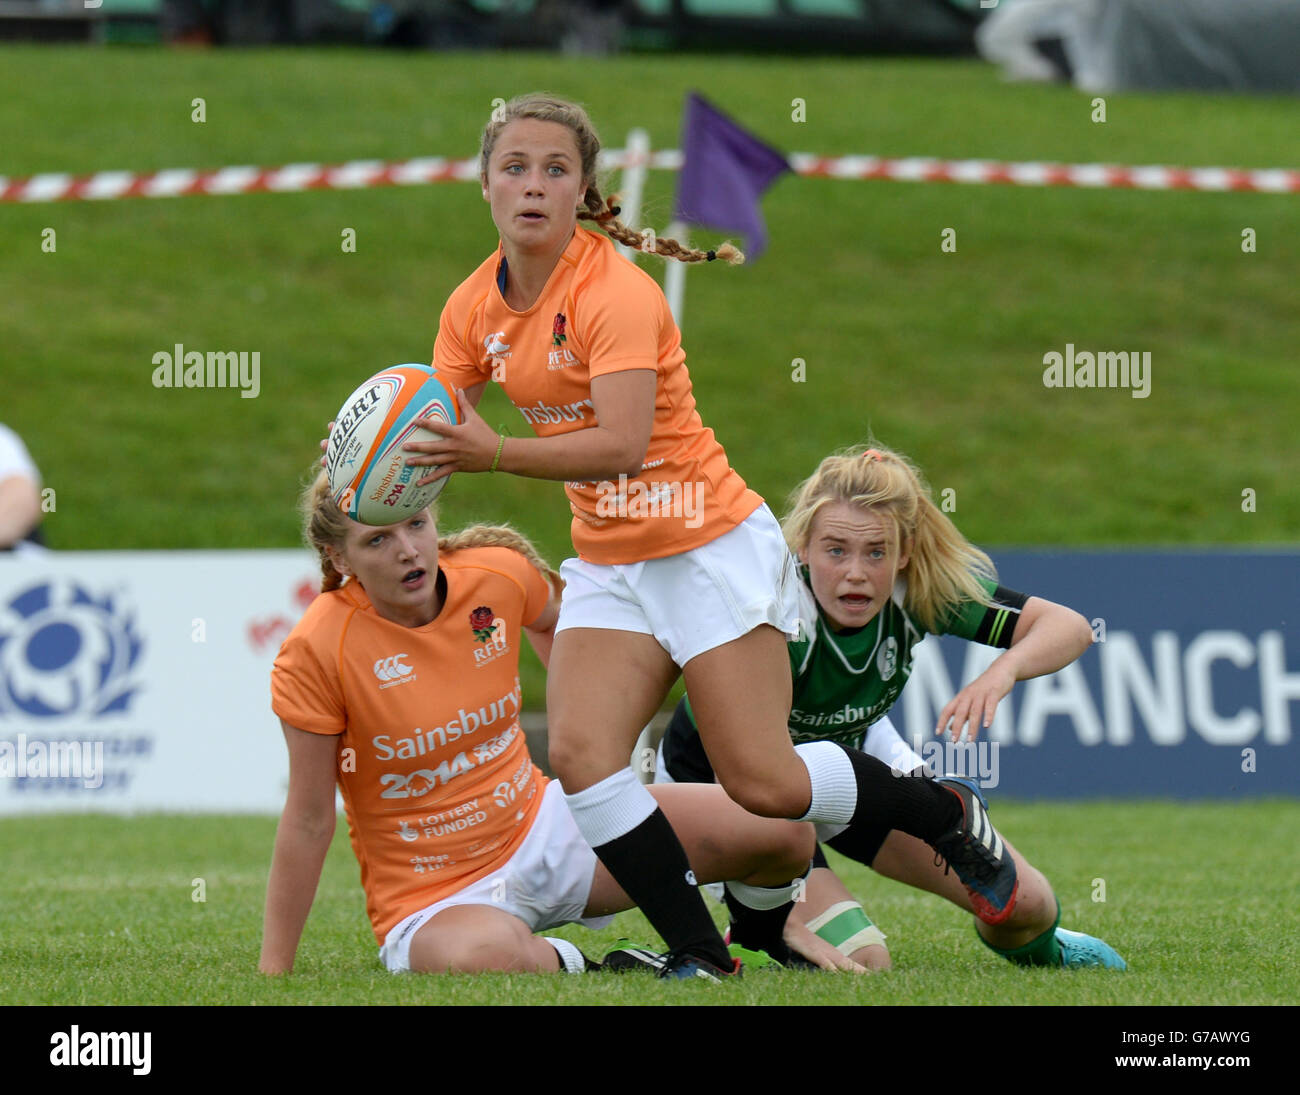 England South West's Lucy Nye competes in the rugby sevens during the Sainsbury's 2014 School Games at the Armitage, Manchester. PRESS ASSOCIATION Photo. Picture date: Friday September 5, 2014. Photo credit should read: Tony Marshall/PA Wire. Stock Photo